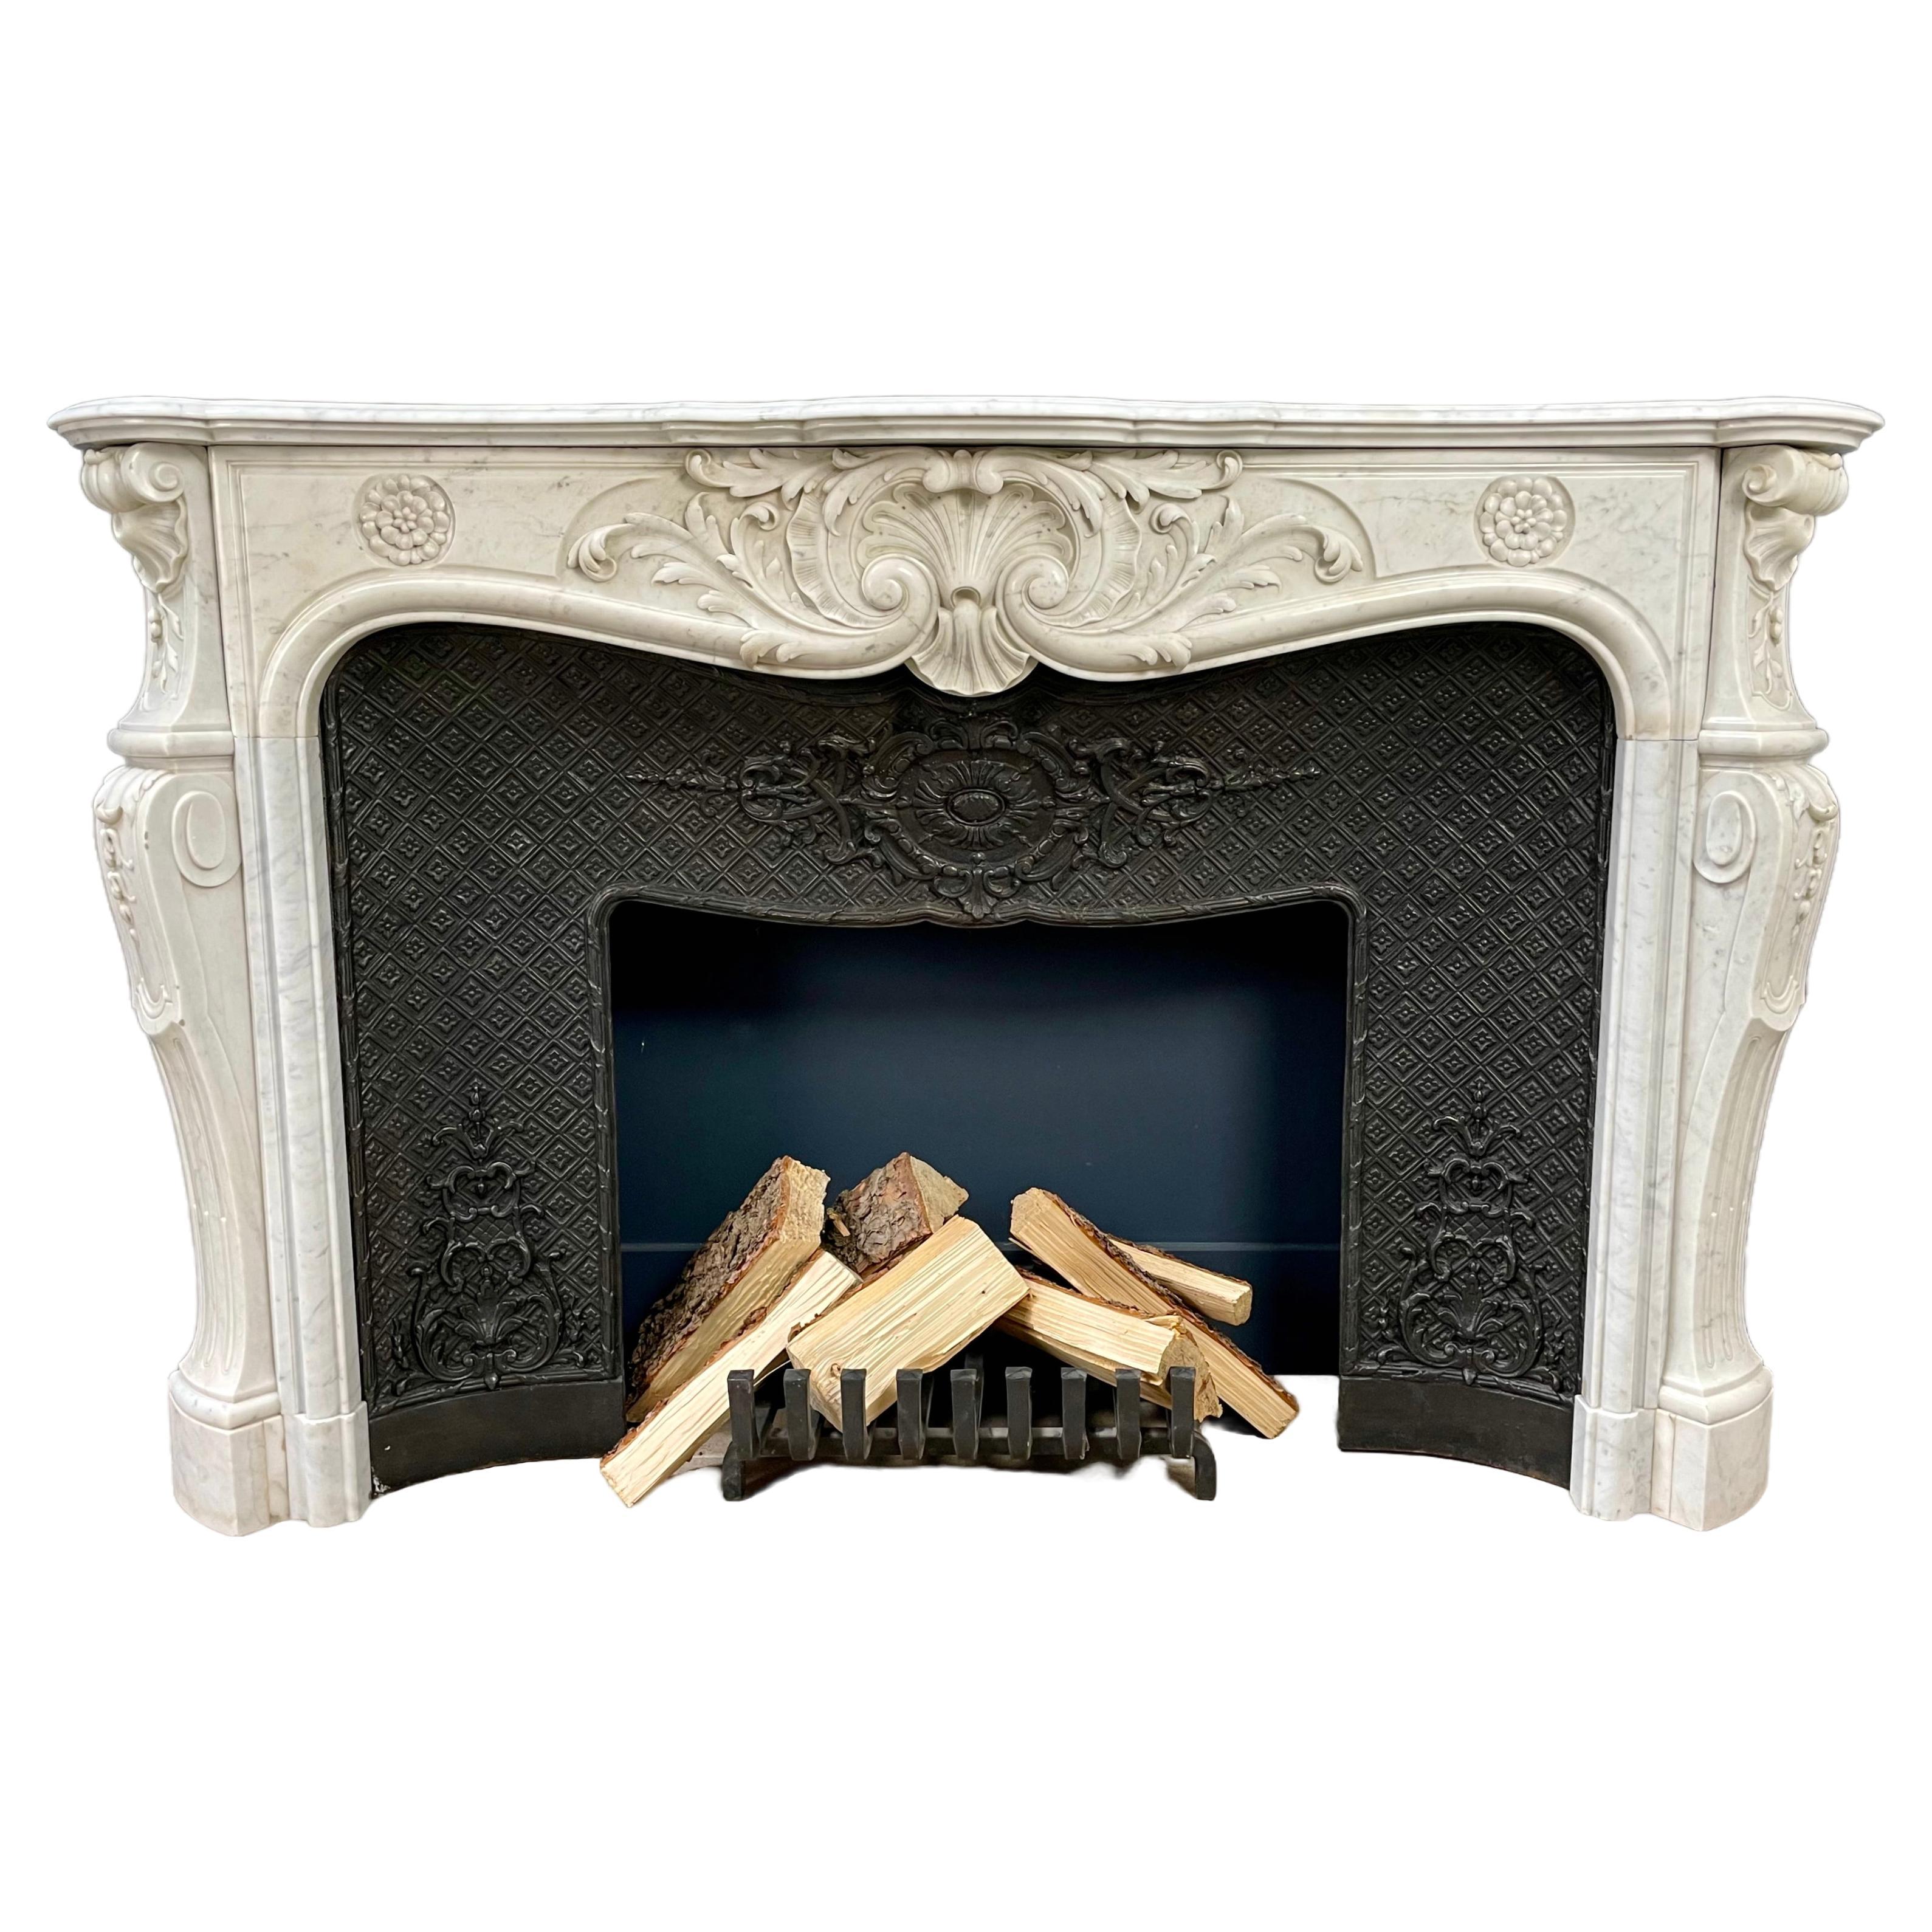 Luxury Antique French Shell Fireplace with Cast Iron Insert Fireplace FREE SHIP. For Sale